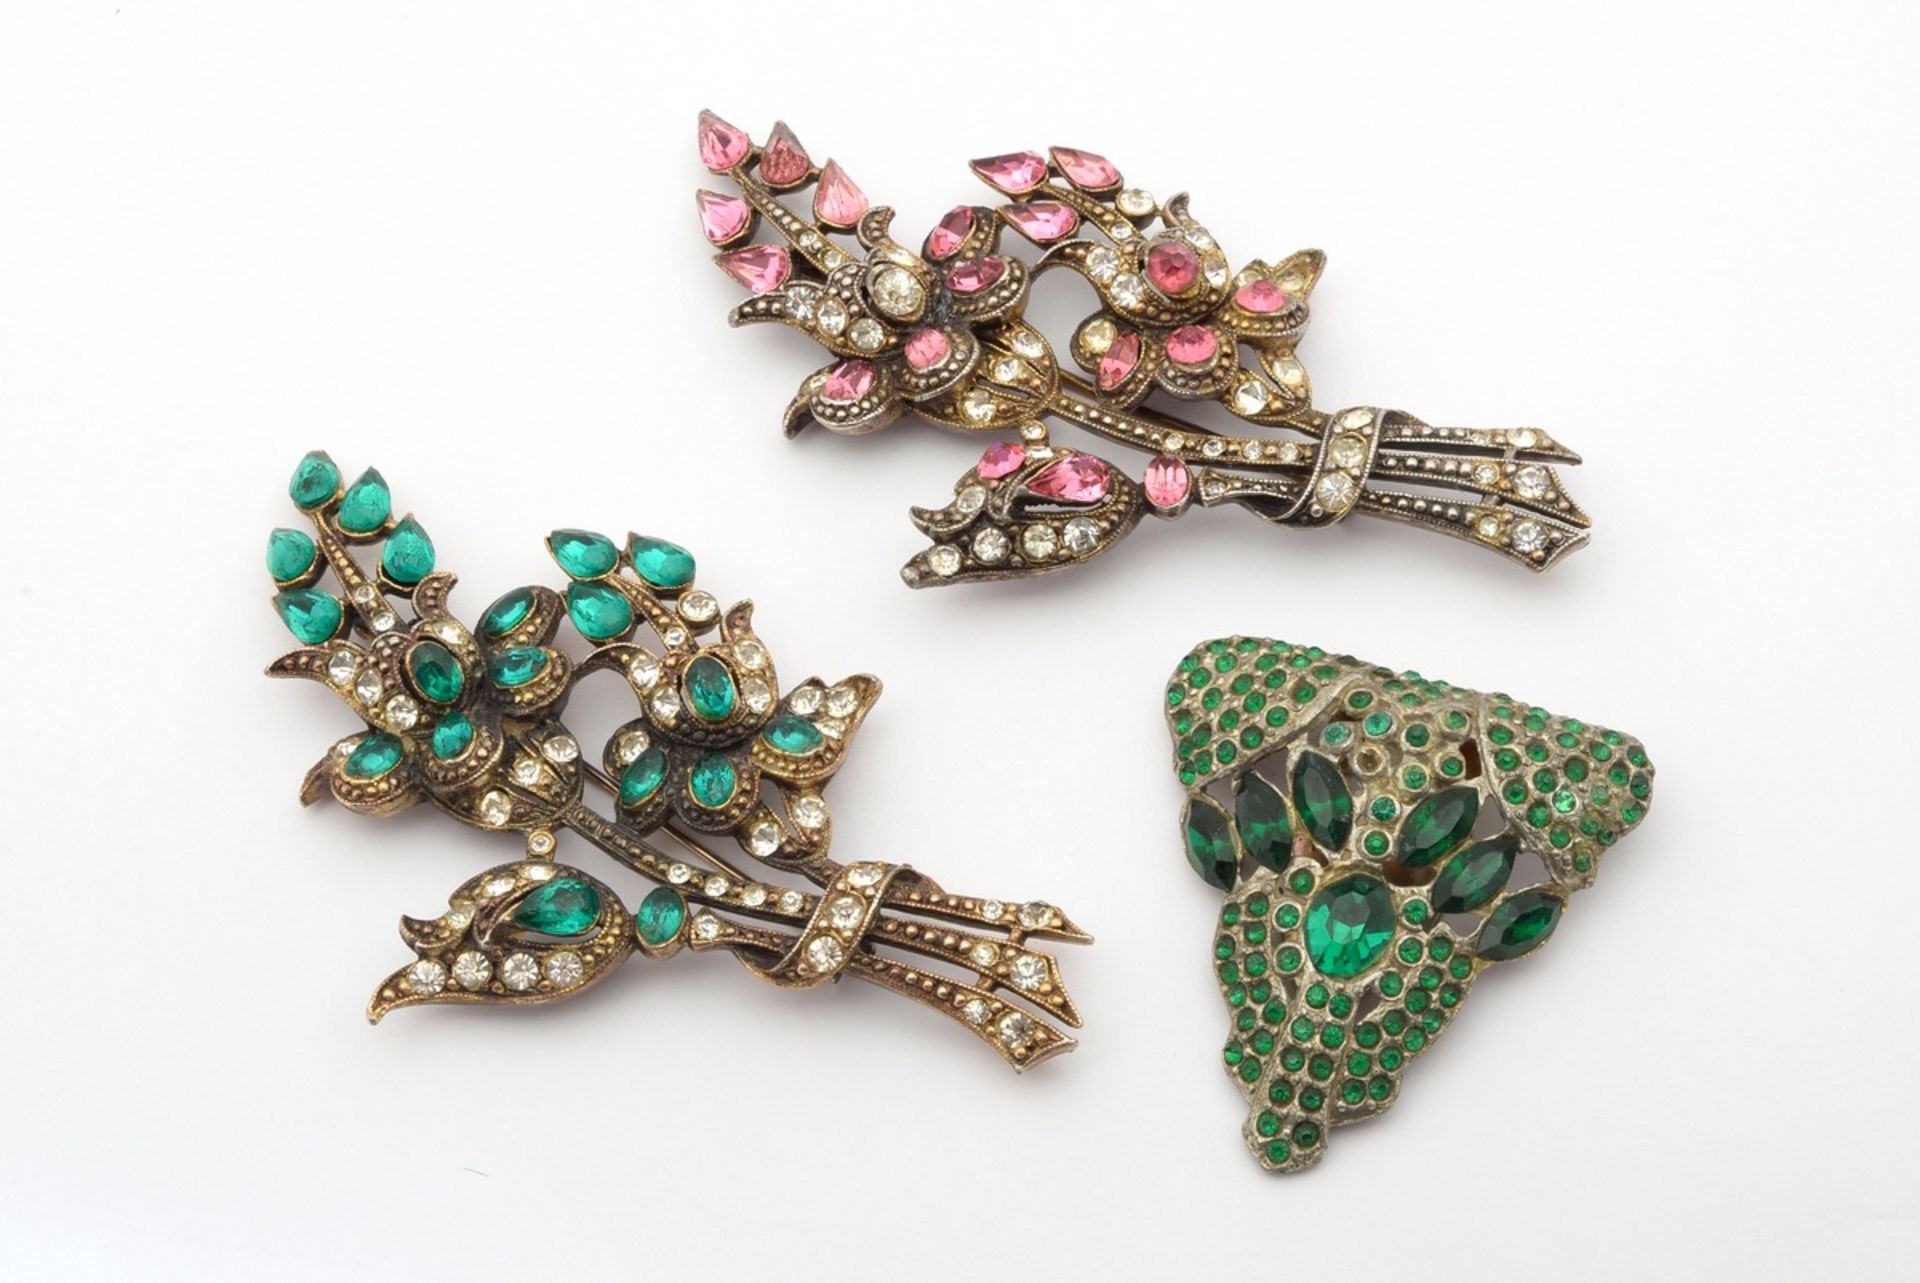 3 pieces of costume jewellery made of white metal with coloured rhinestones: 2x fur/costume pins, s